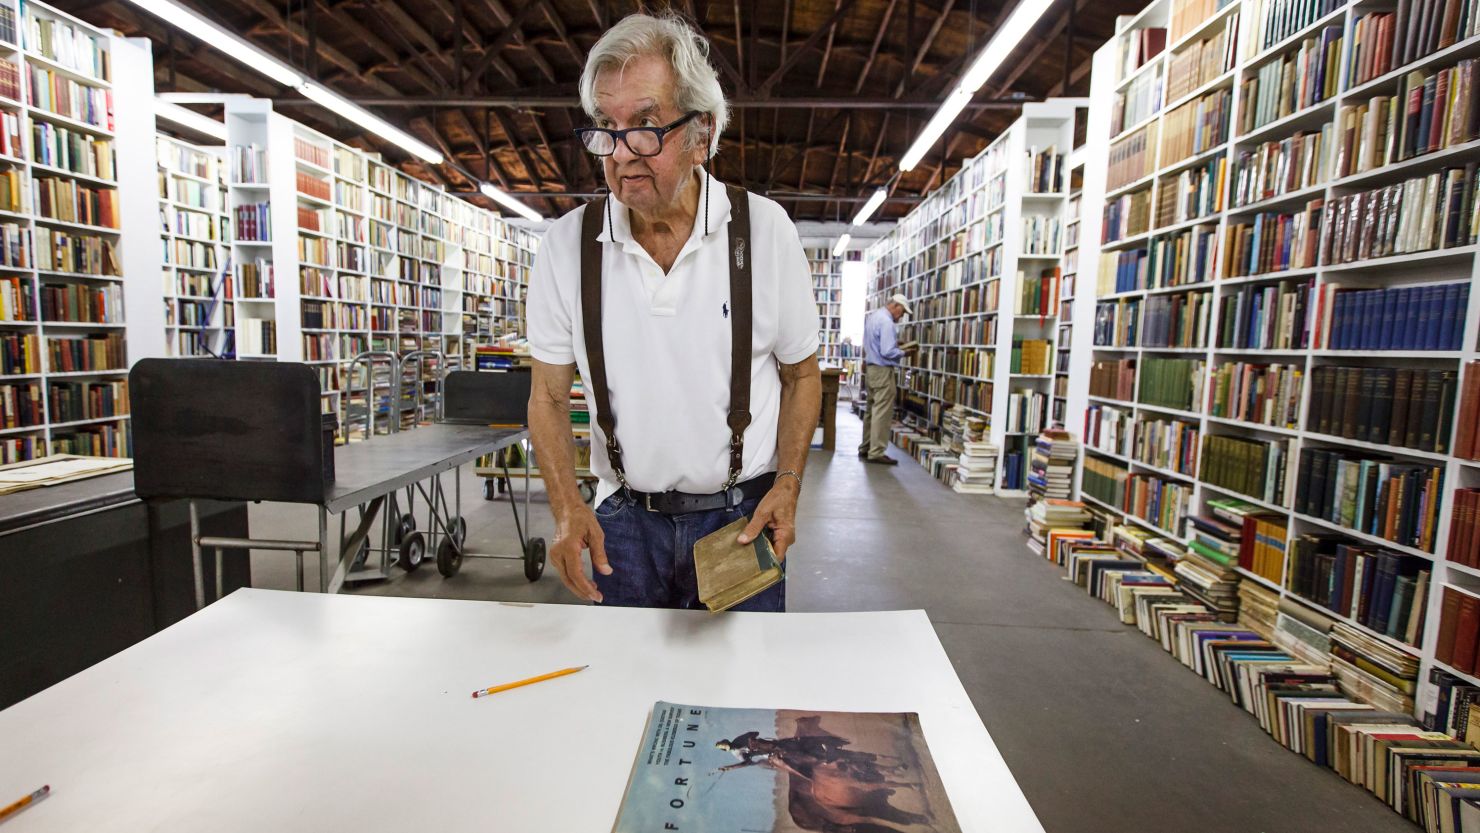 Larry McMurtry at his bookstore, Booked Up No. 1, in Archer City, Texas, before auctioning off more than 300,000 books at "The Last Book Sale" in August 2012.